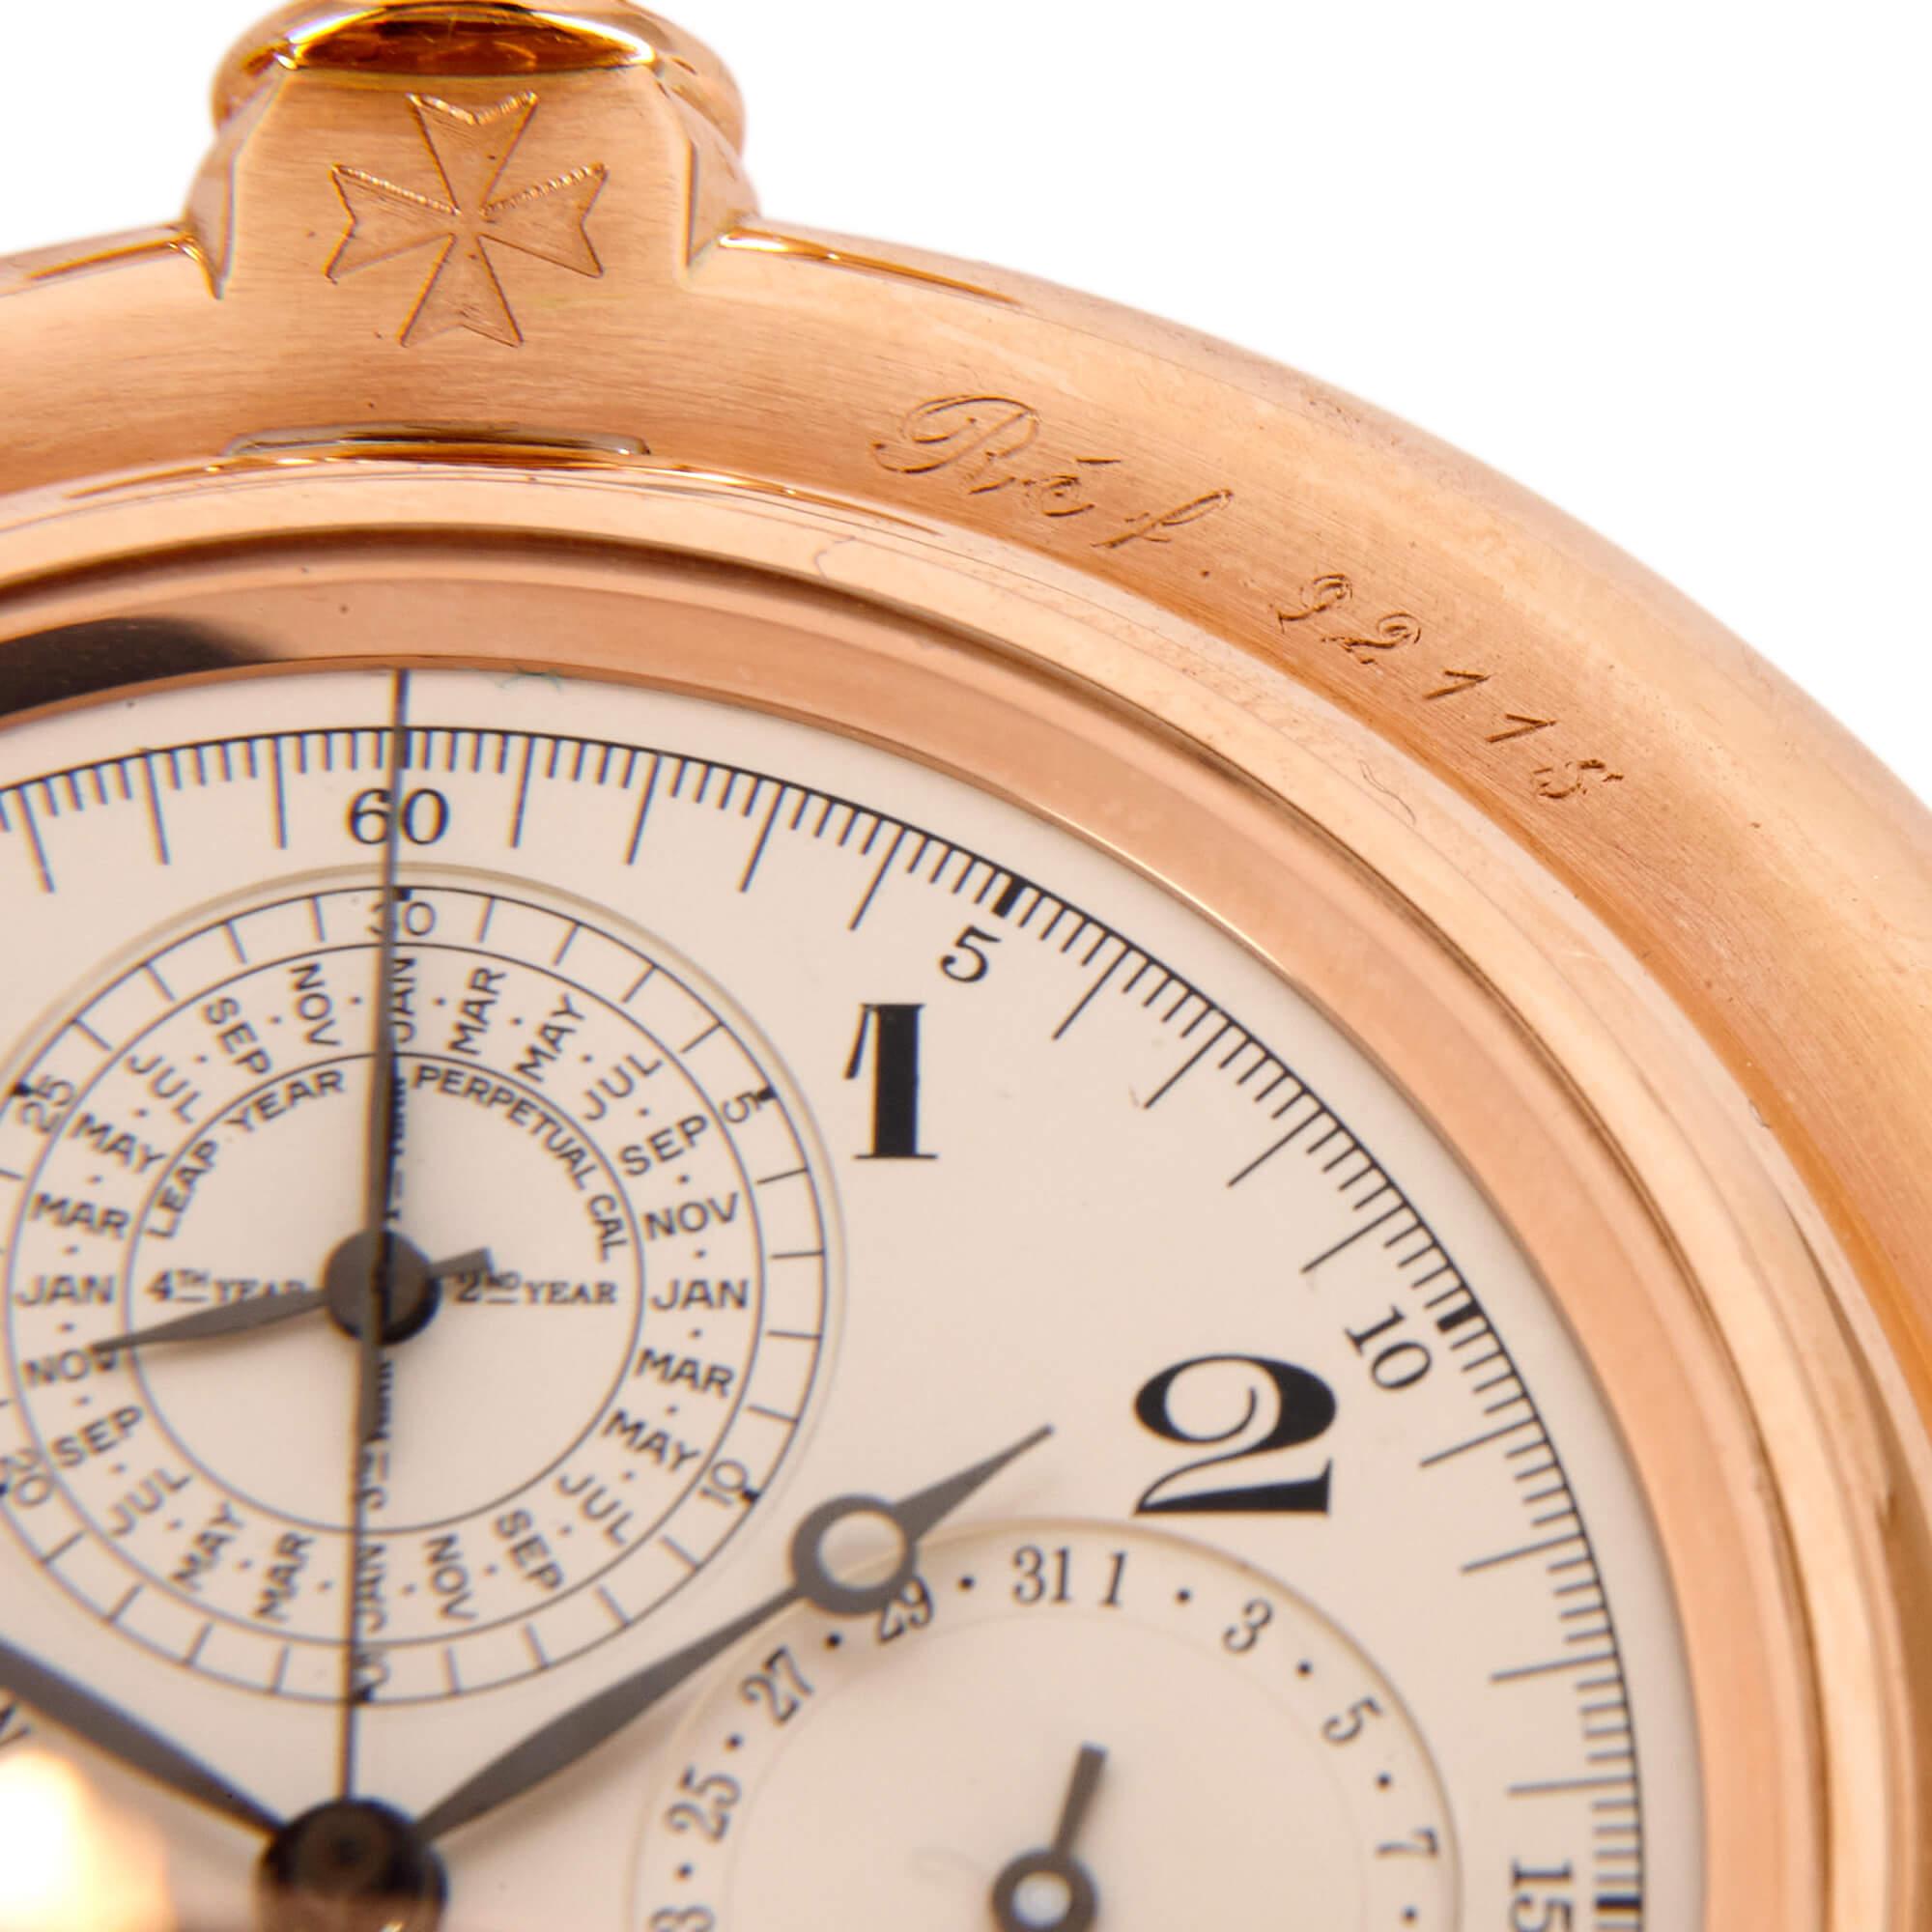 Vacheron Constantin Ref. 92115, a very fine, unique 18K pink gold pocket watch In Excellent Condition For Sale In London, GB